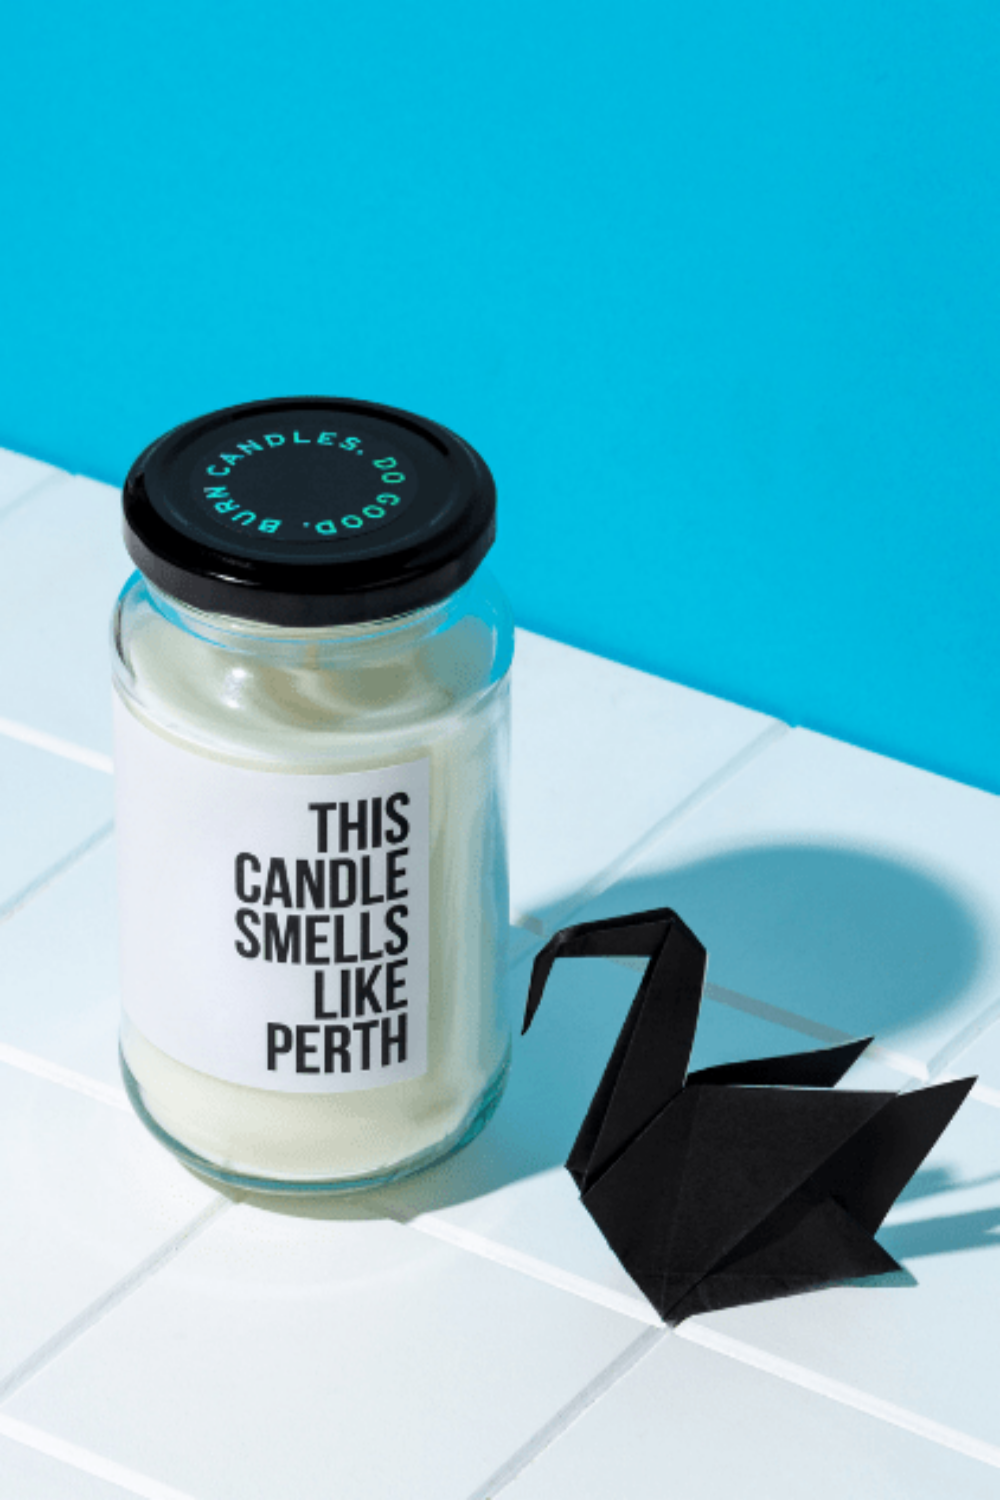 THIS CANDLE SMELLS LIKE PERTH